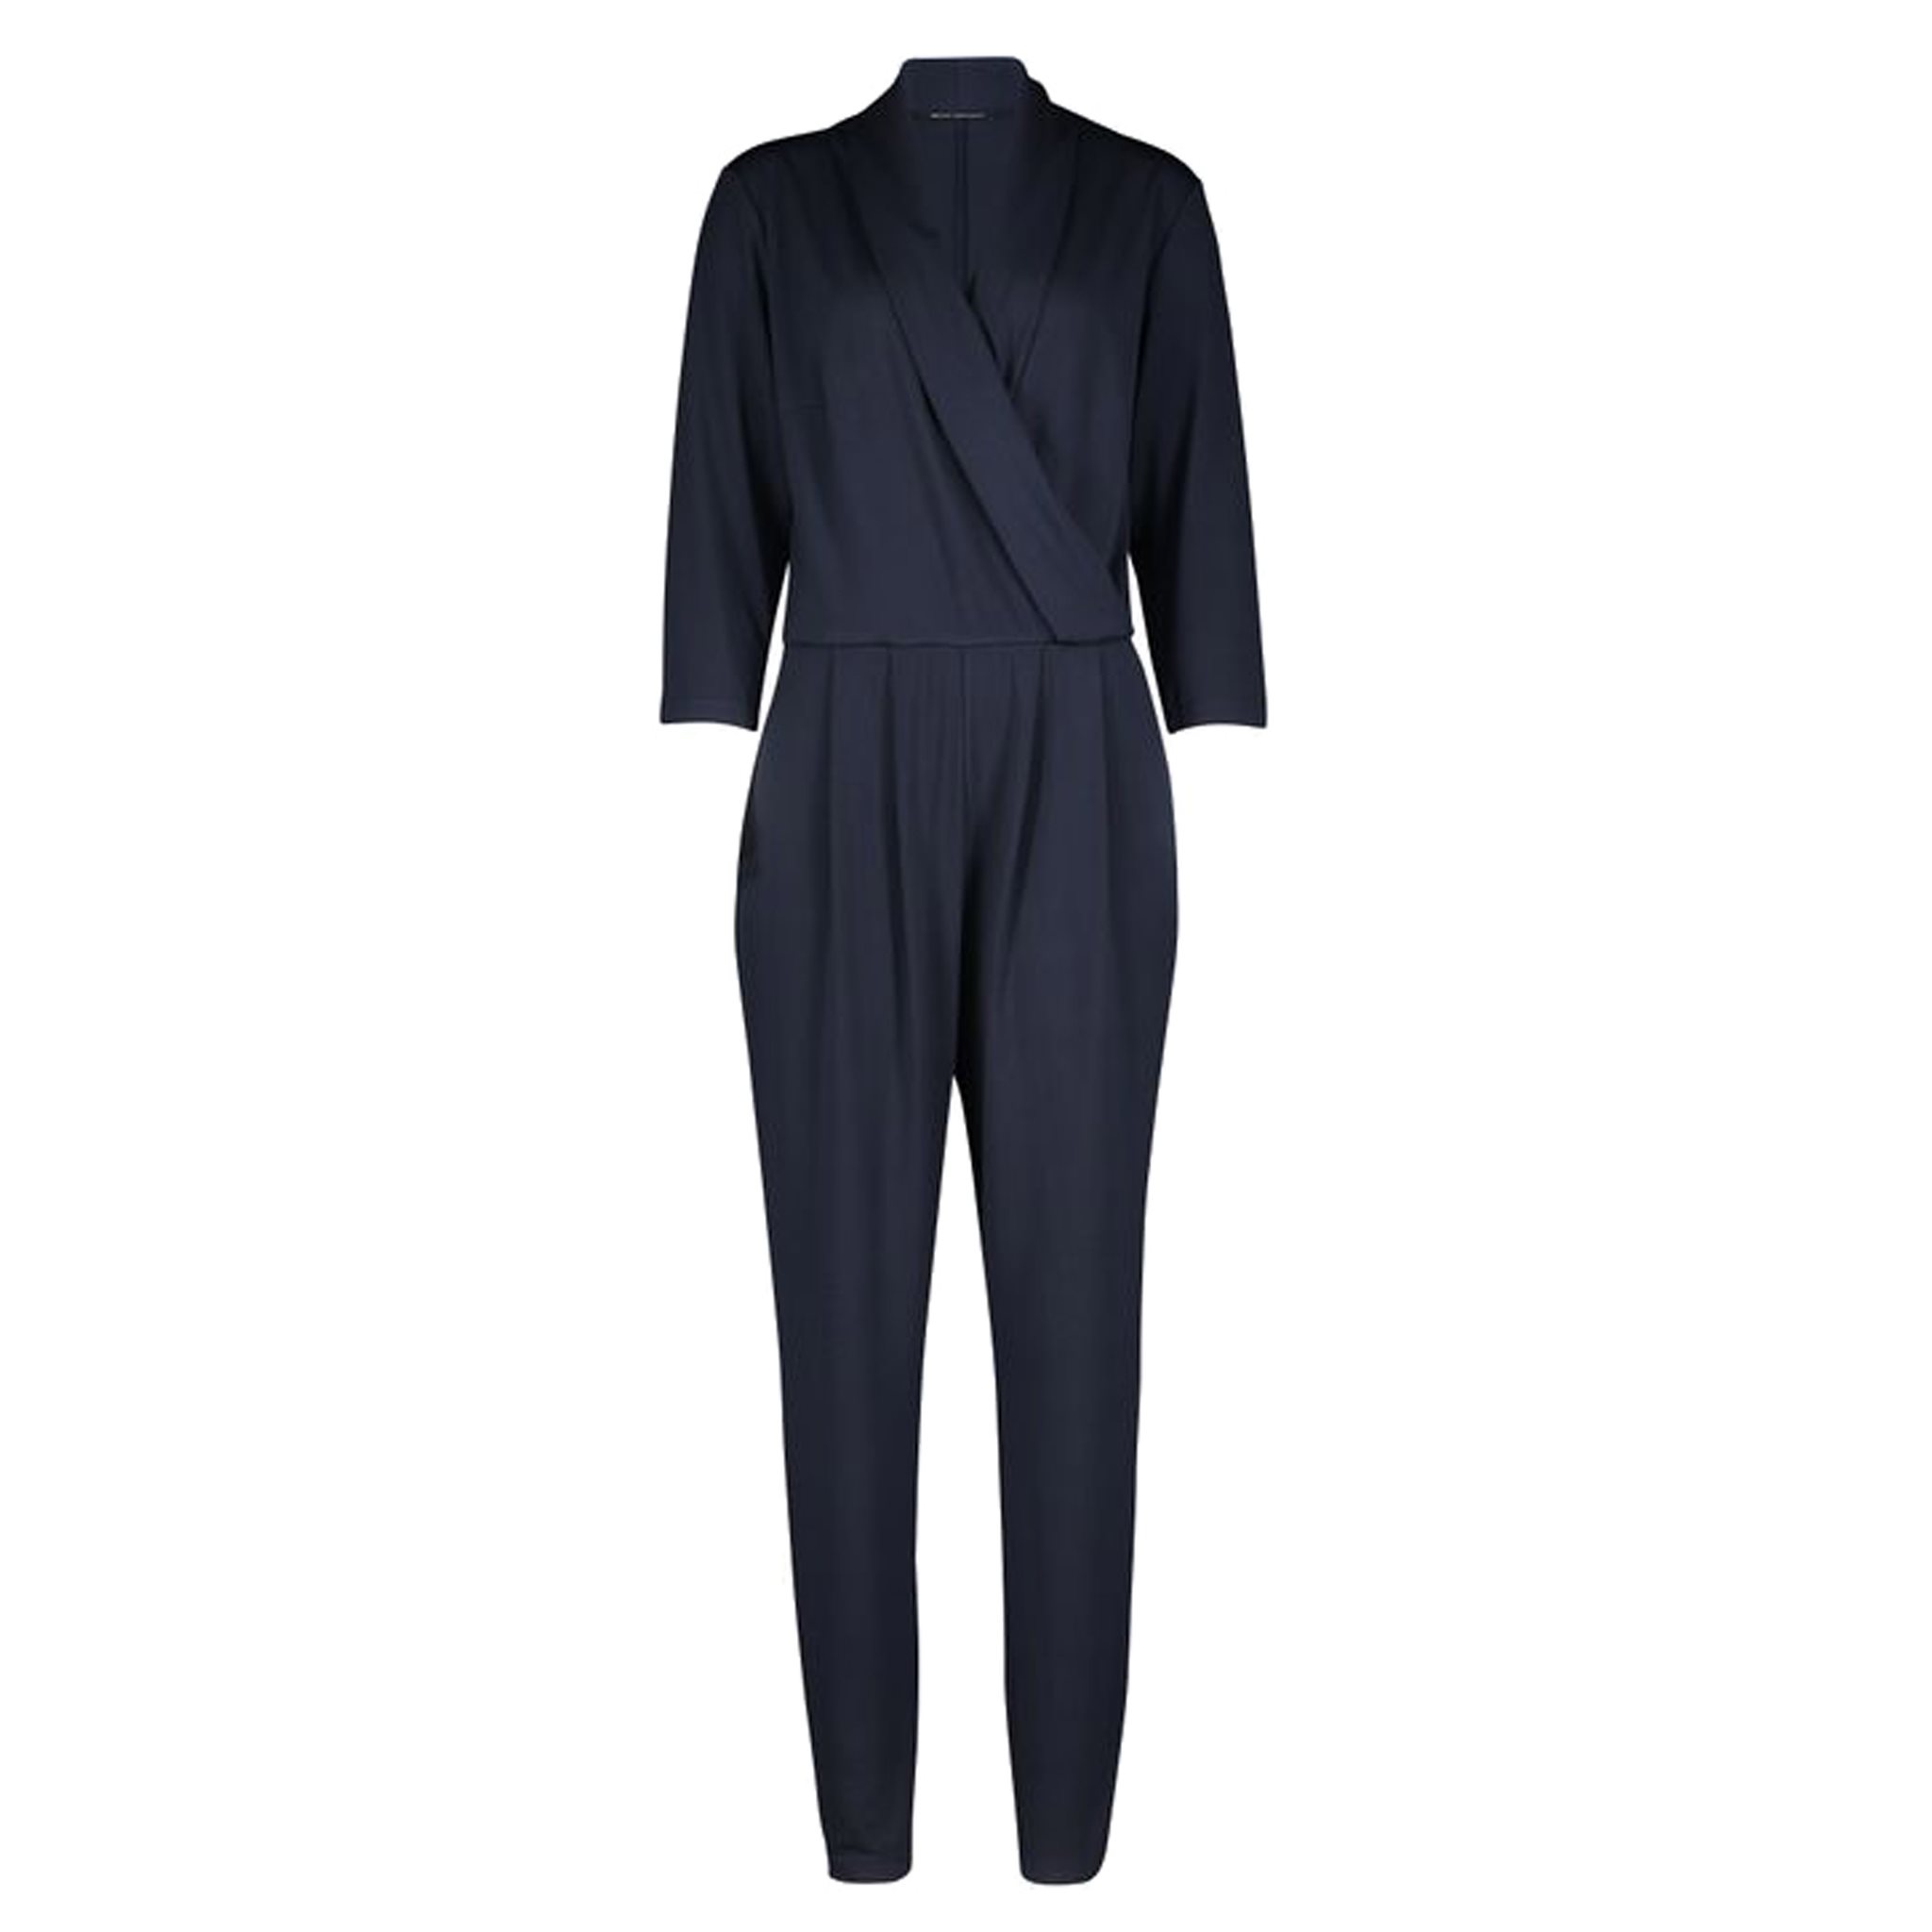 JUMPSUIT BETTY BARCLAY